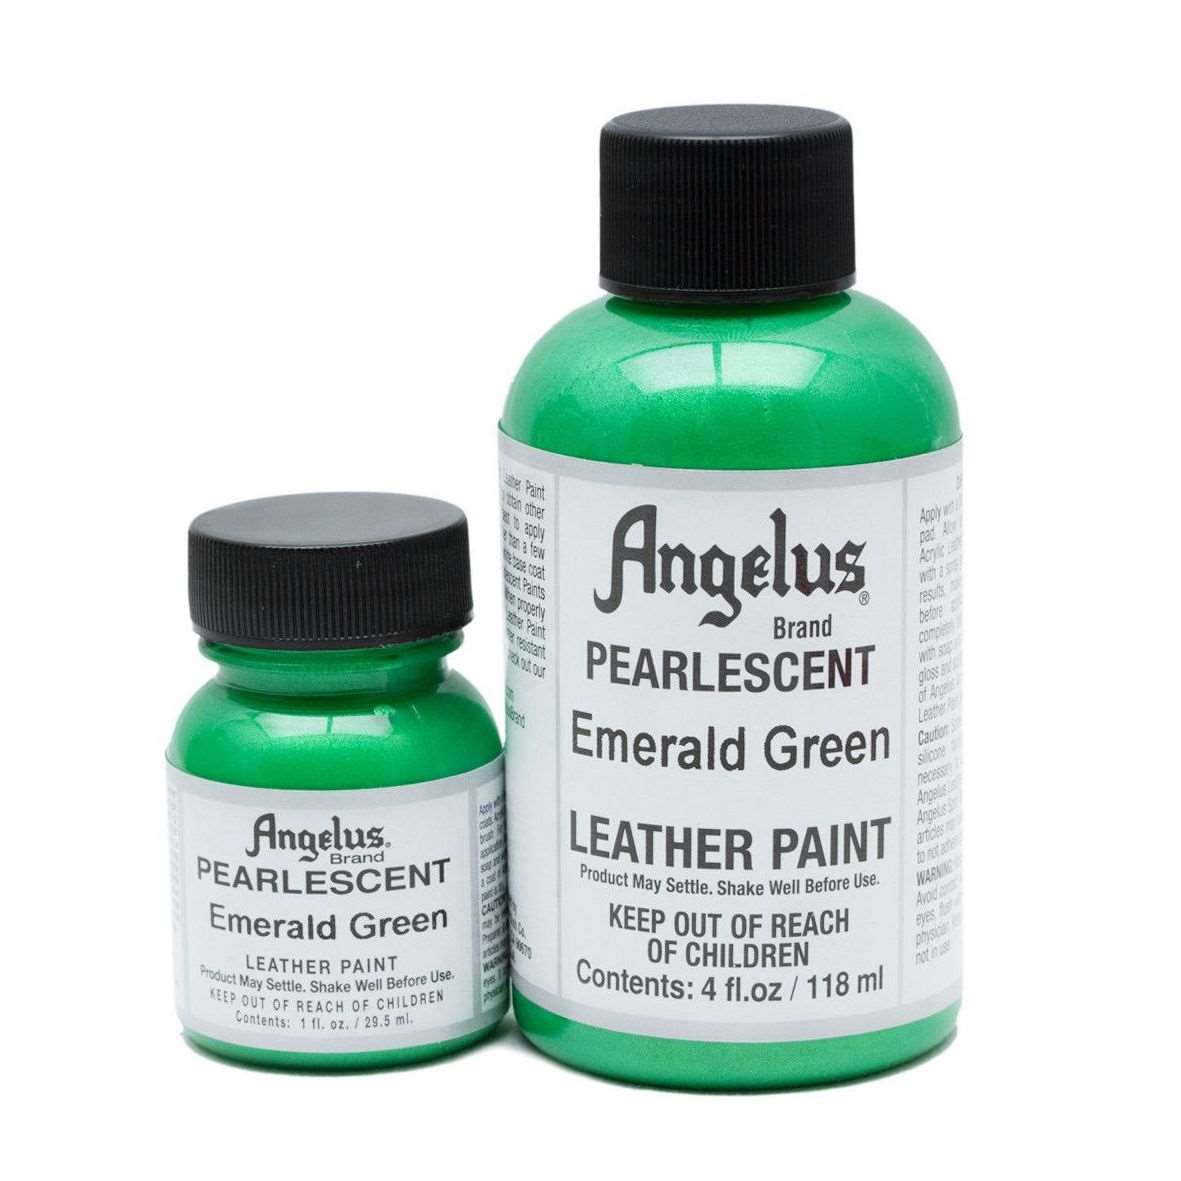 ANGELUS Acrylic Leather Paint Emerald Green Pearlescent | Mollies Make And Create NZ